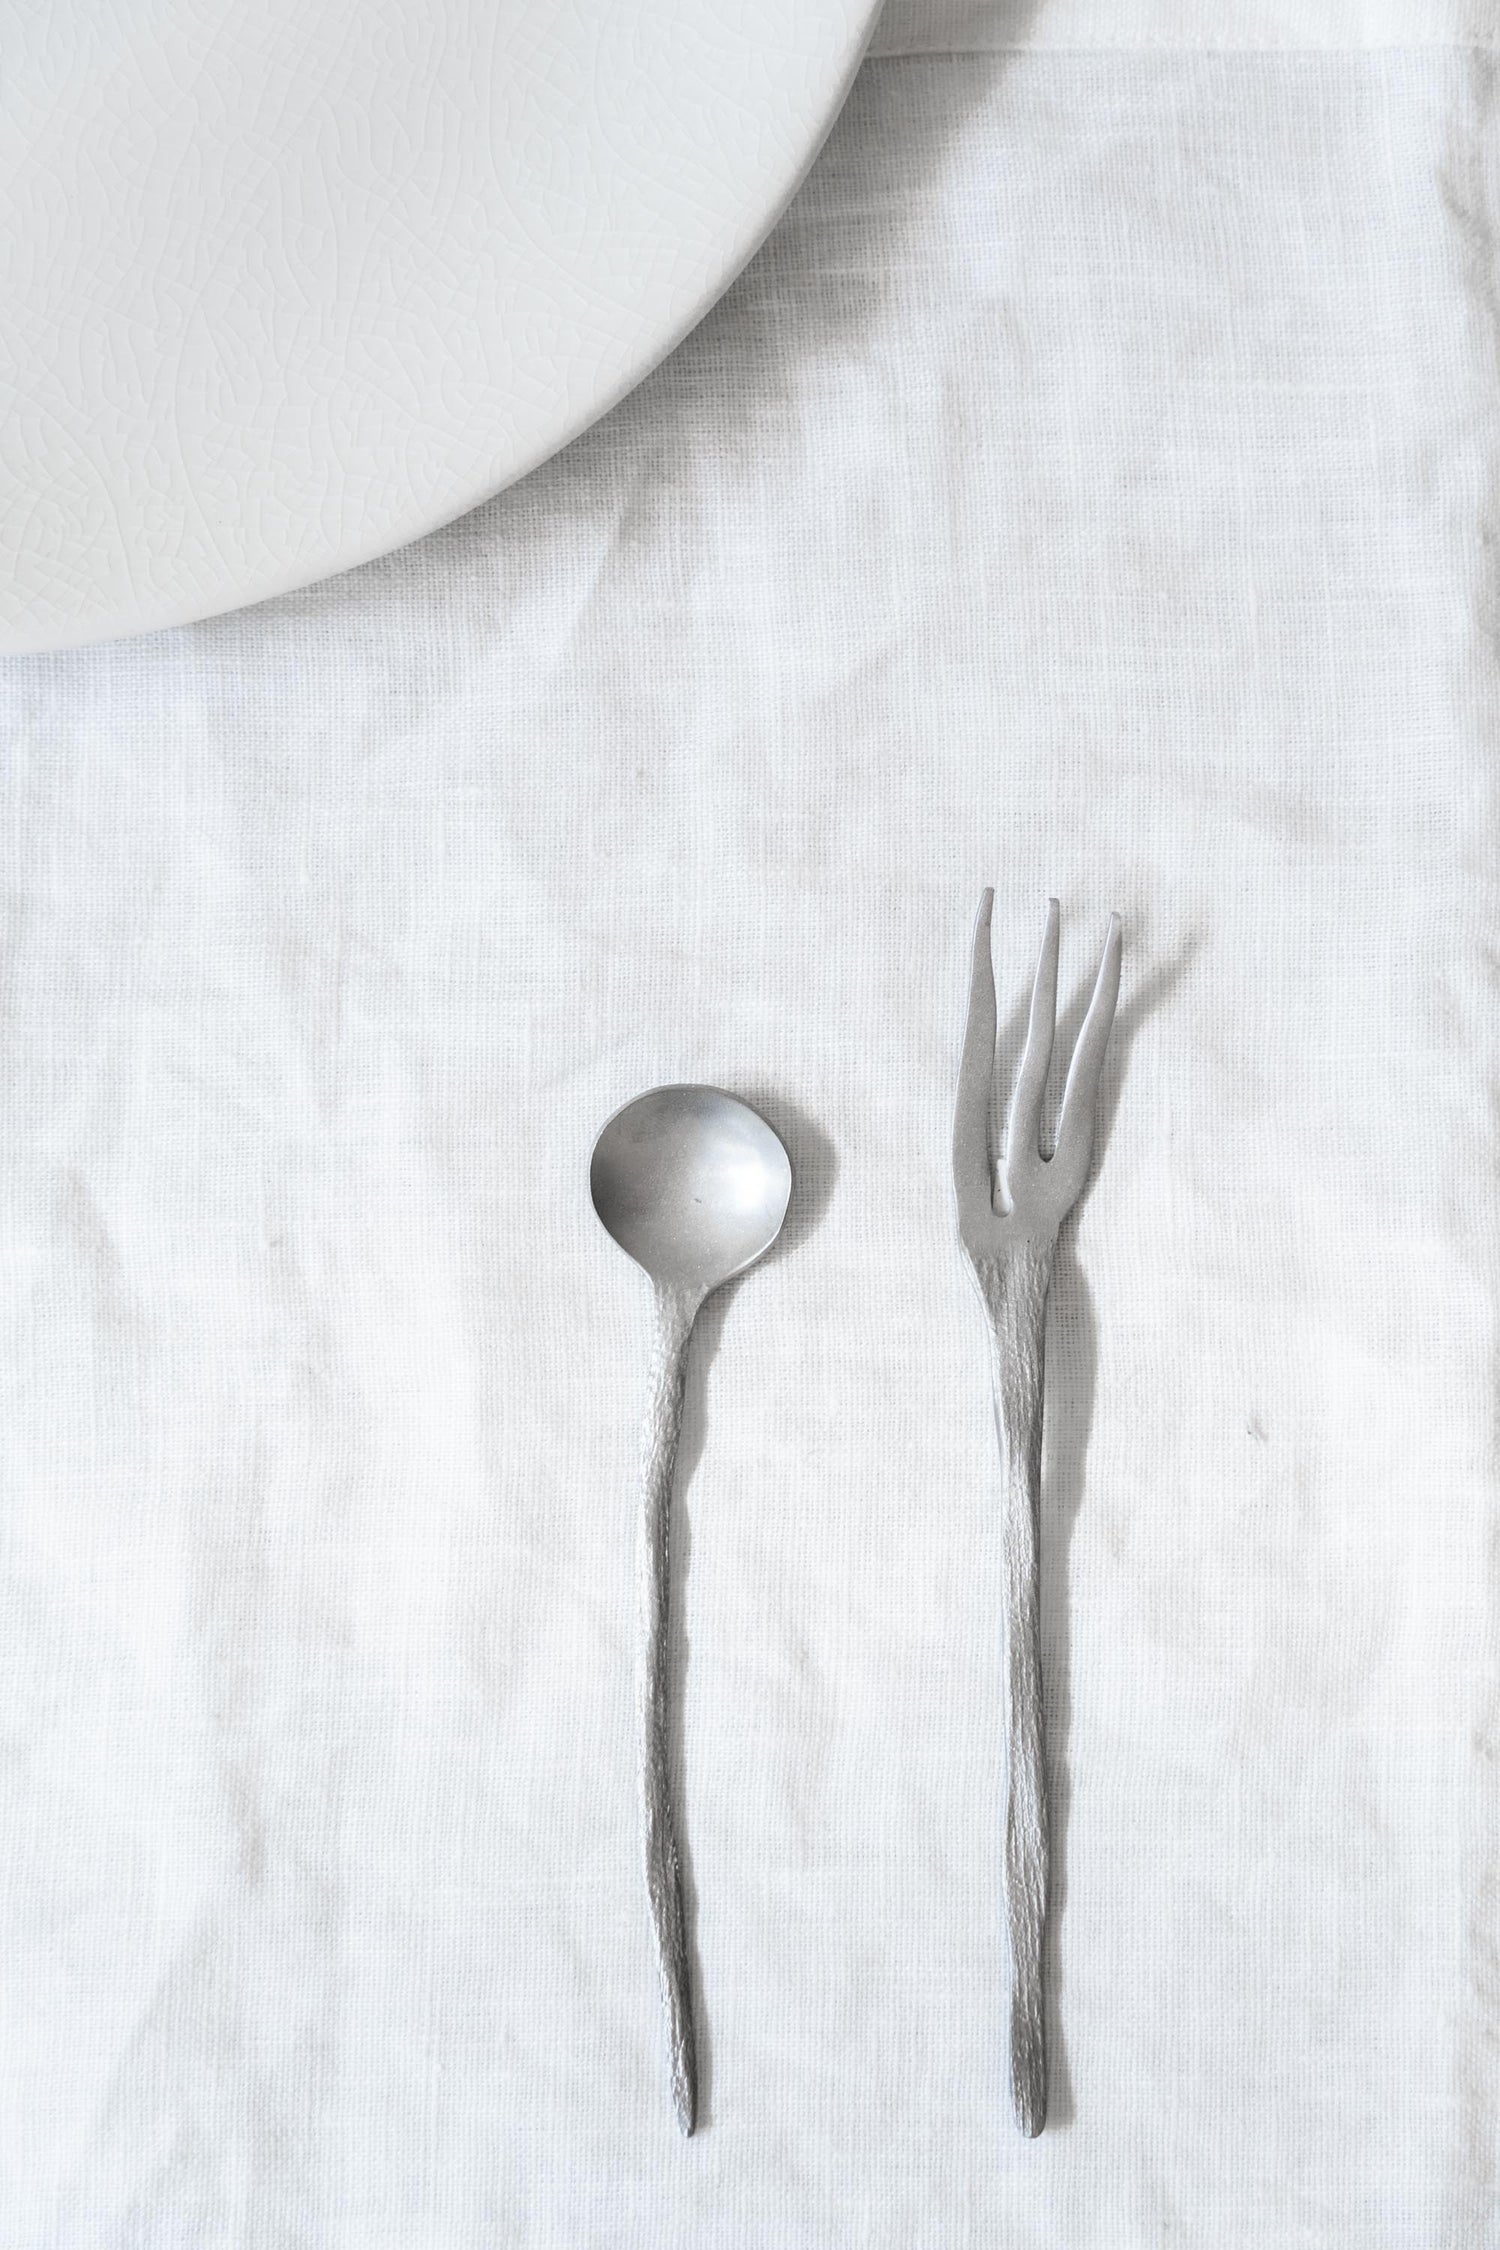 Dessert Fork from the Flora Vulgaris Cutlery Collection by Serax.